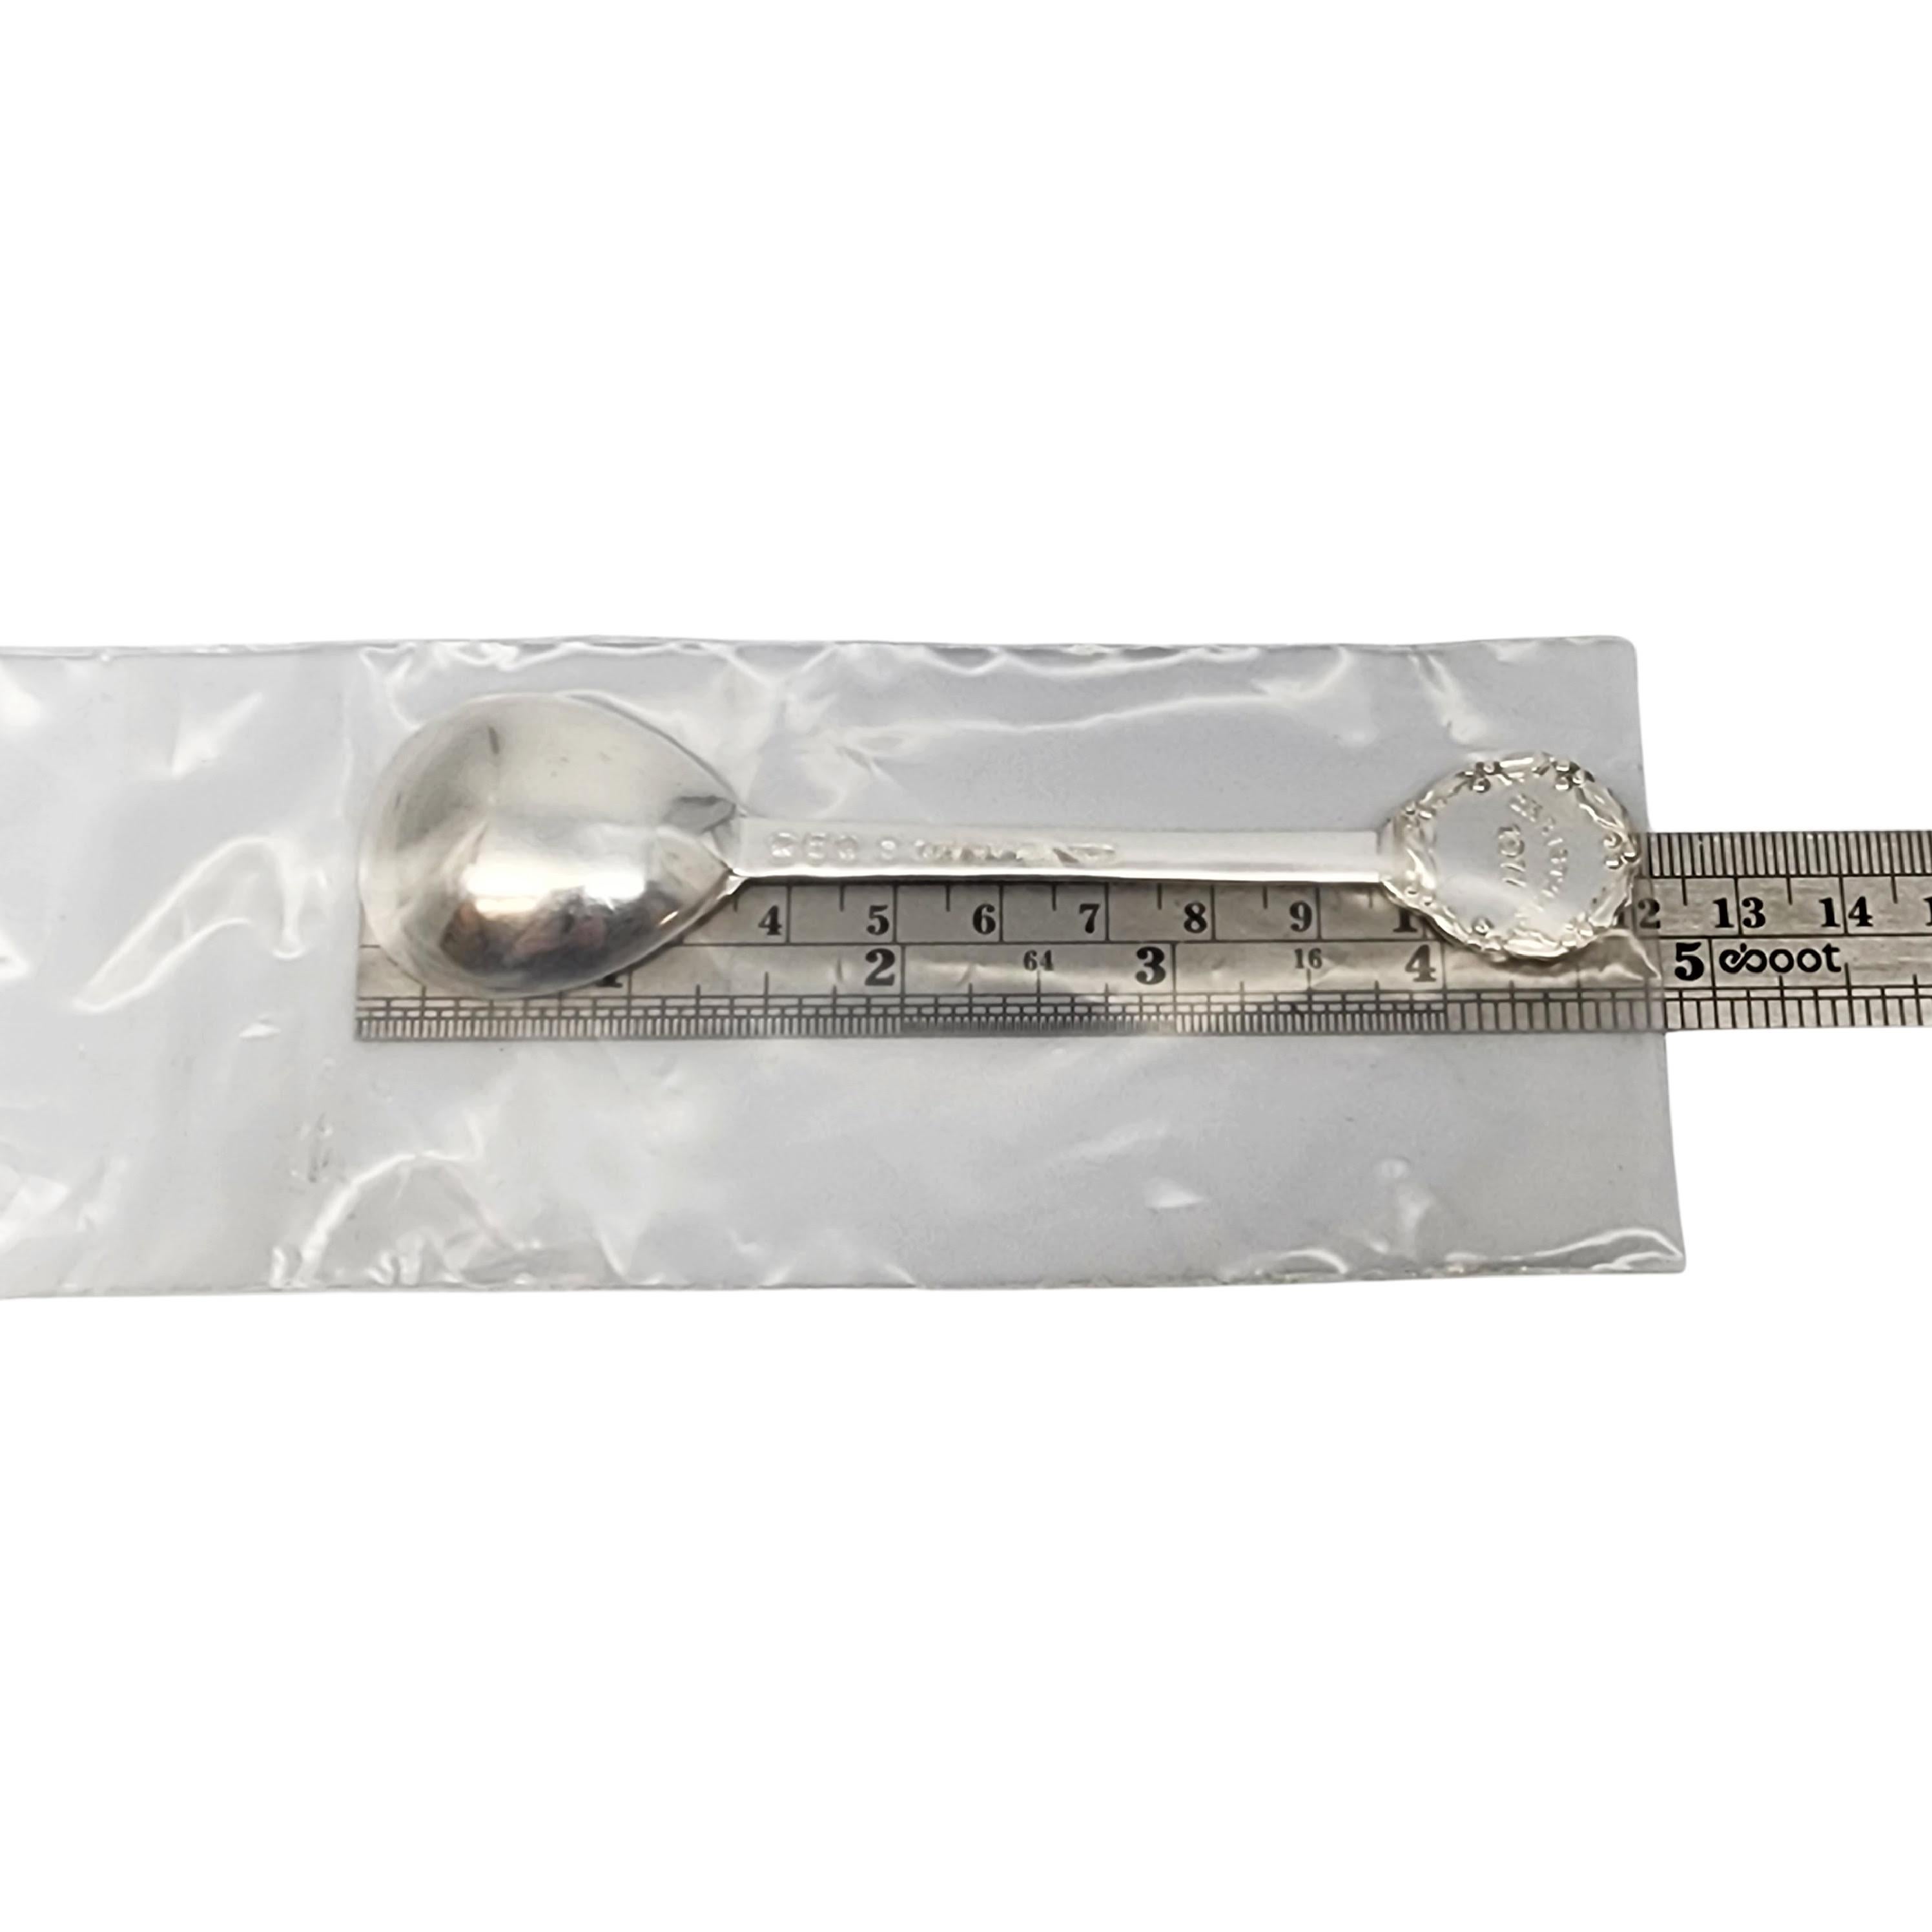 Gorham Sterling Silver 1977 Christmas Spoon Sealed with Box #15798 For Sale 3